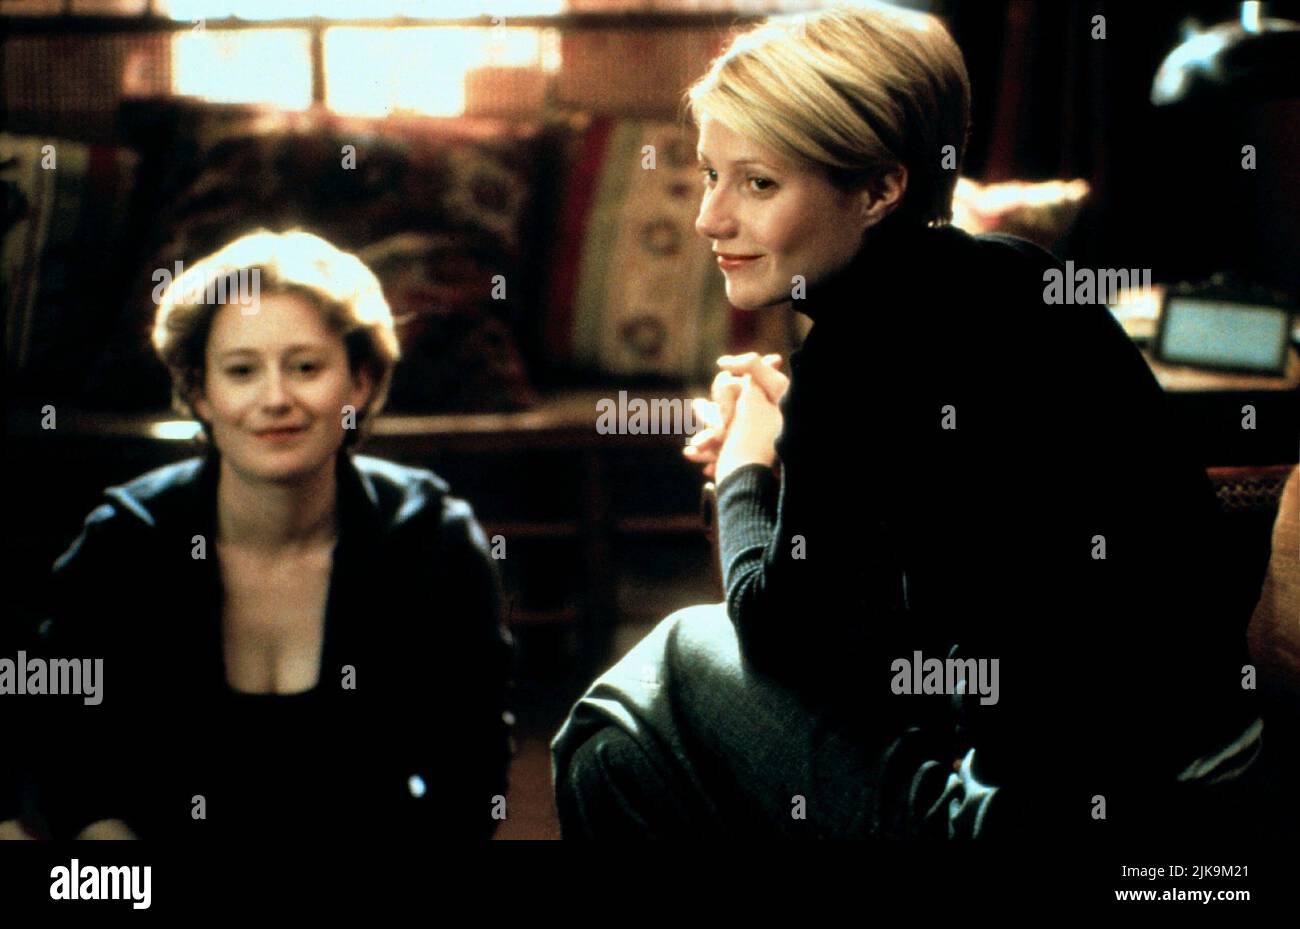 Zara Turner & Gwyneth Paltrow Film: Sliding Doors (1998) Characters: Anna &  Helen Quilley Director: Peter Howitt 26 January 1998 **WARNING** This  Photograph is for editorial use only and is the copyright